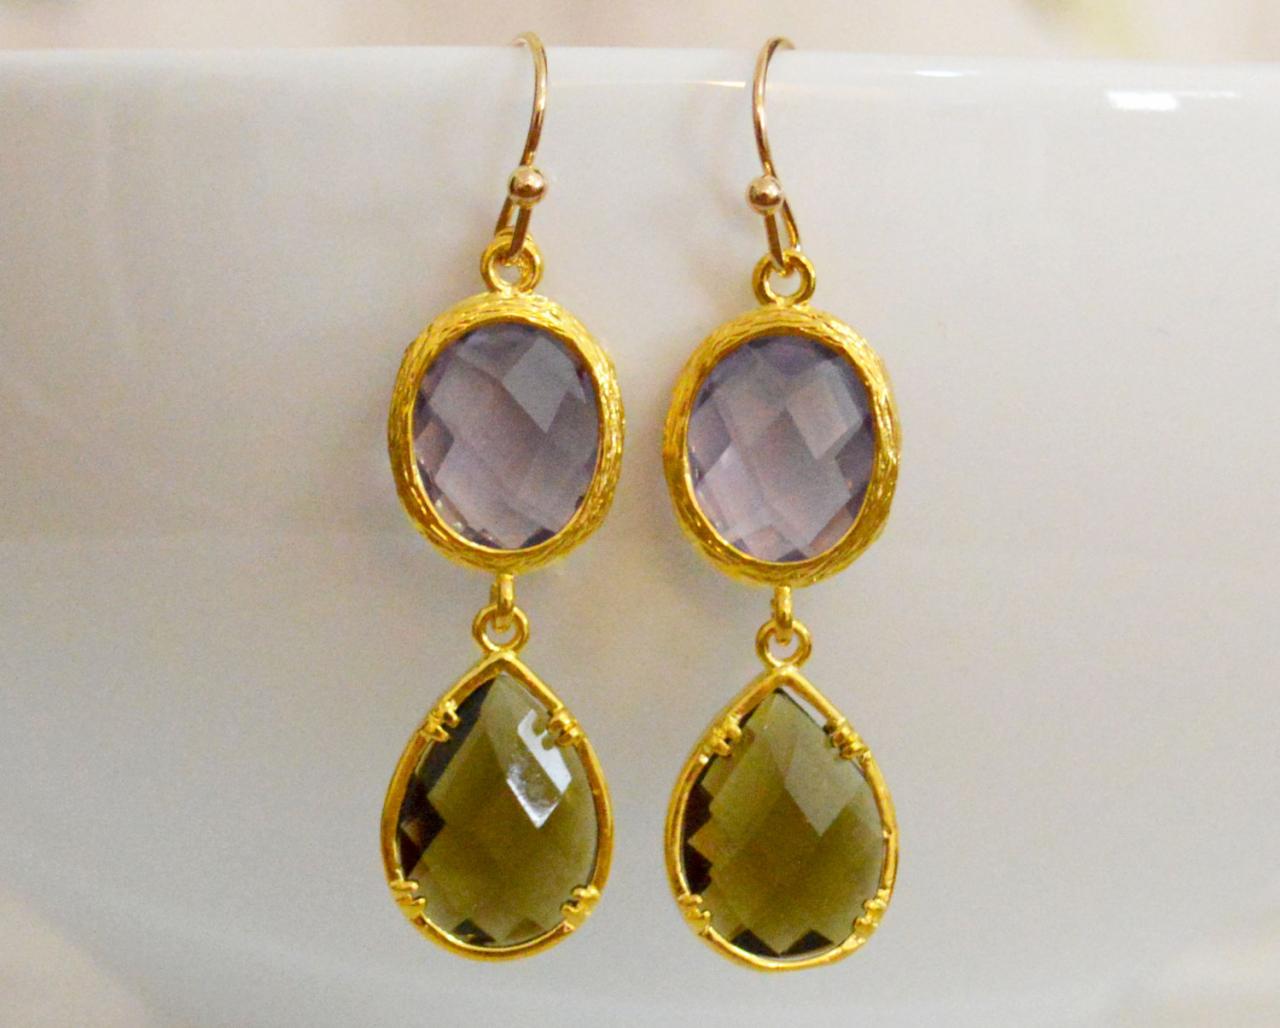 Glass Drop Earrings, Tanzanite & Morion Drop Earrings, Dangle Earrings, Gold Plated Earrings/bridesmaid Gifts/everyday Jewelry/